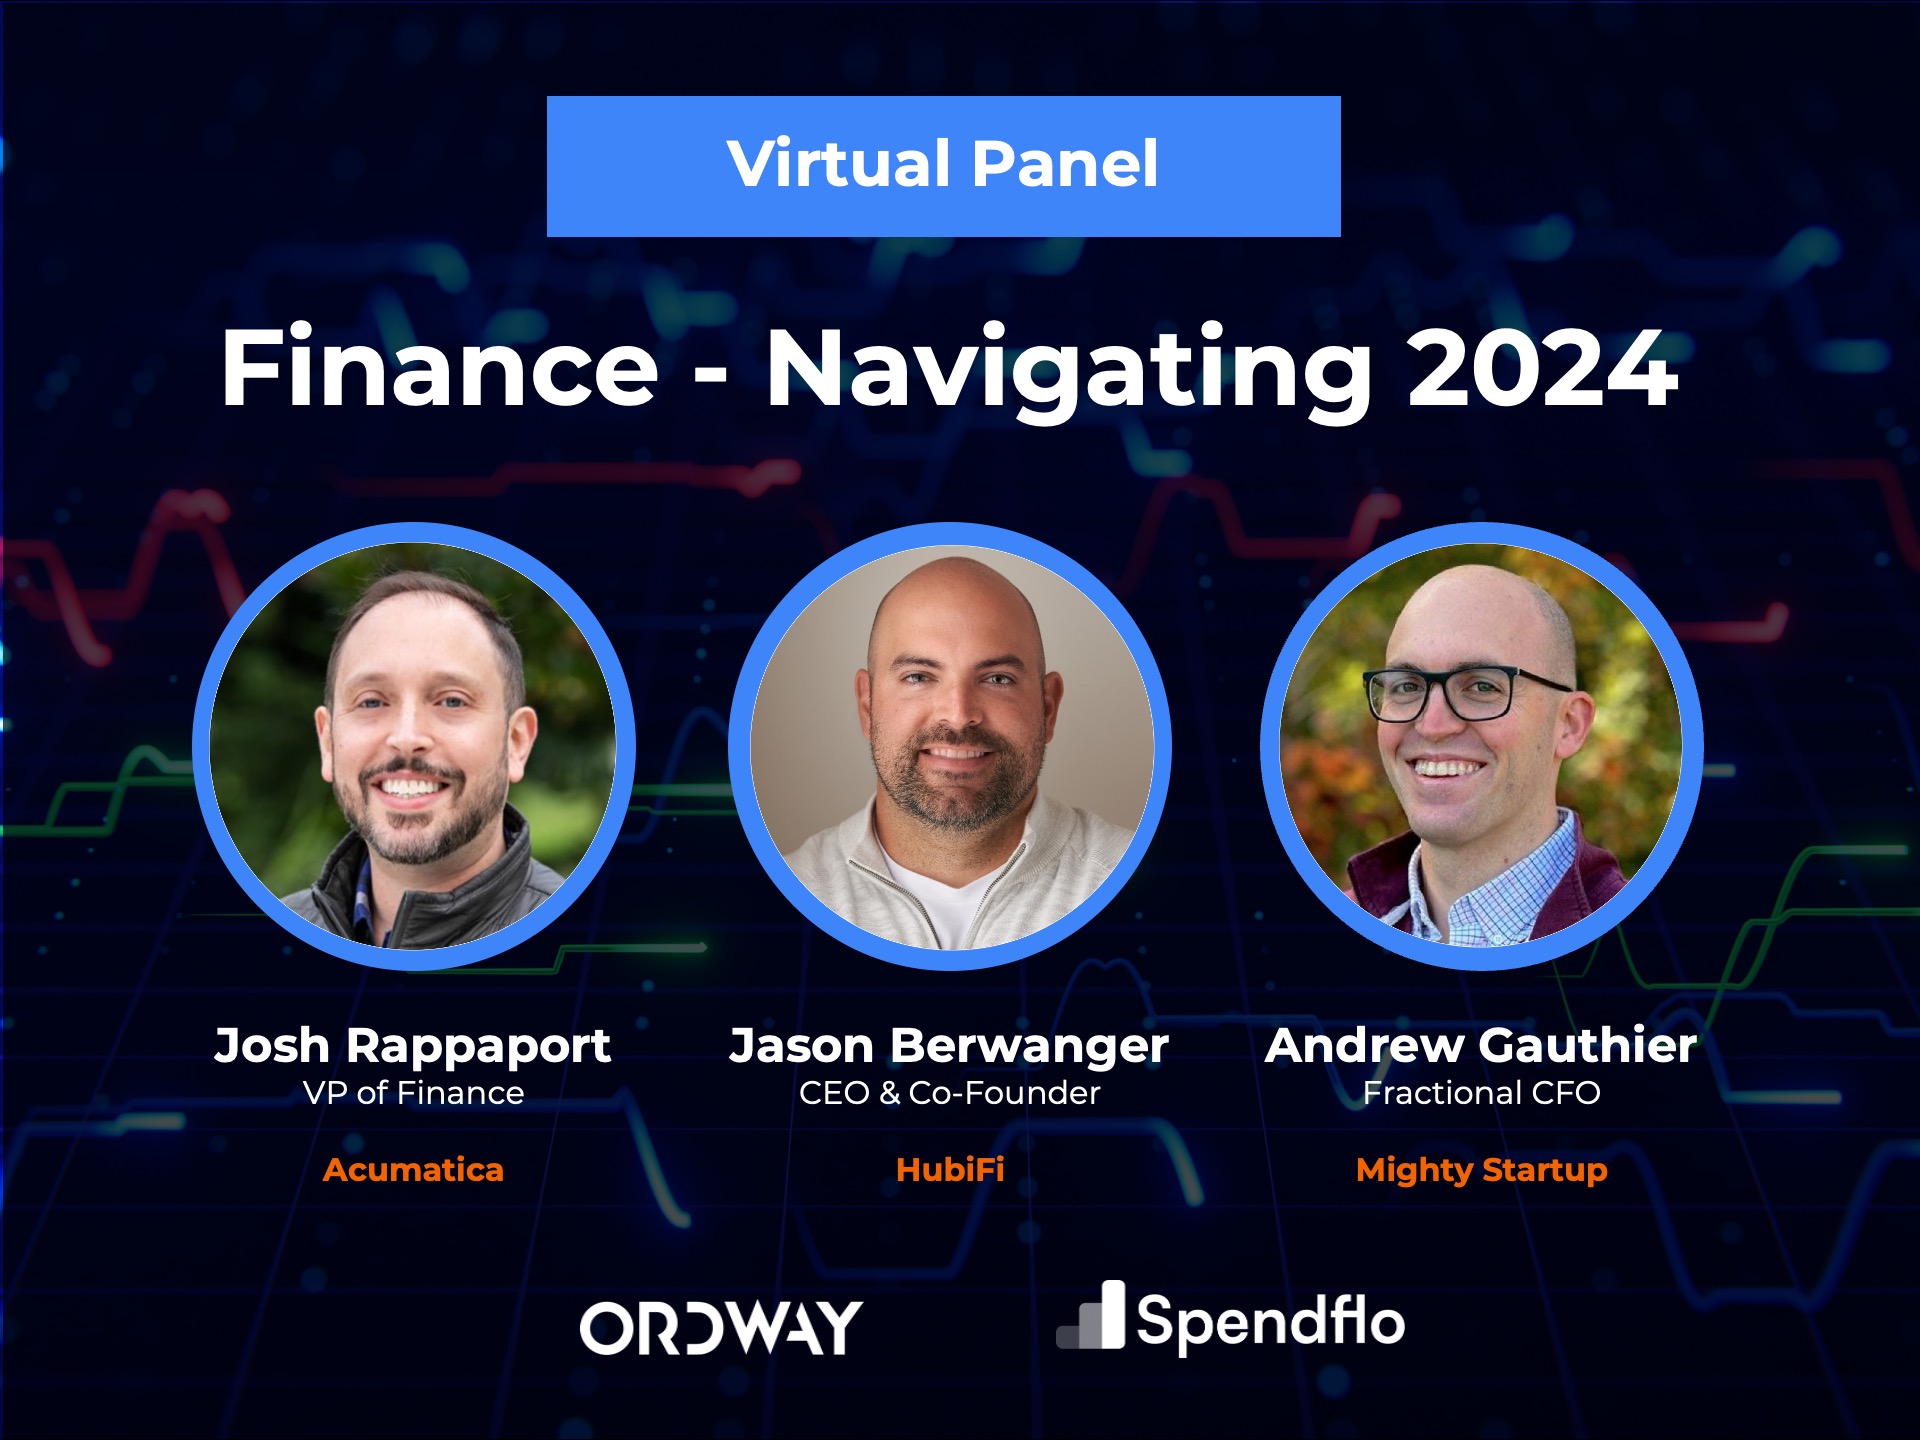 promotion for saas finance leaders virtual panel with josh rappaport, Jason berwanger, andy Gauthier